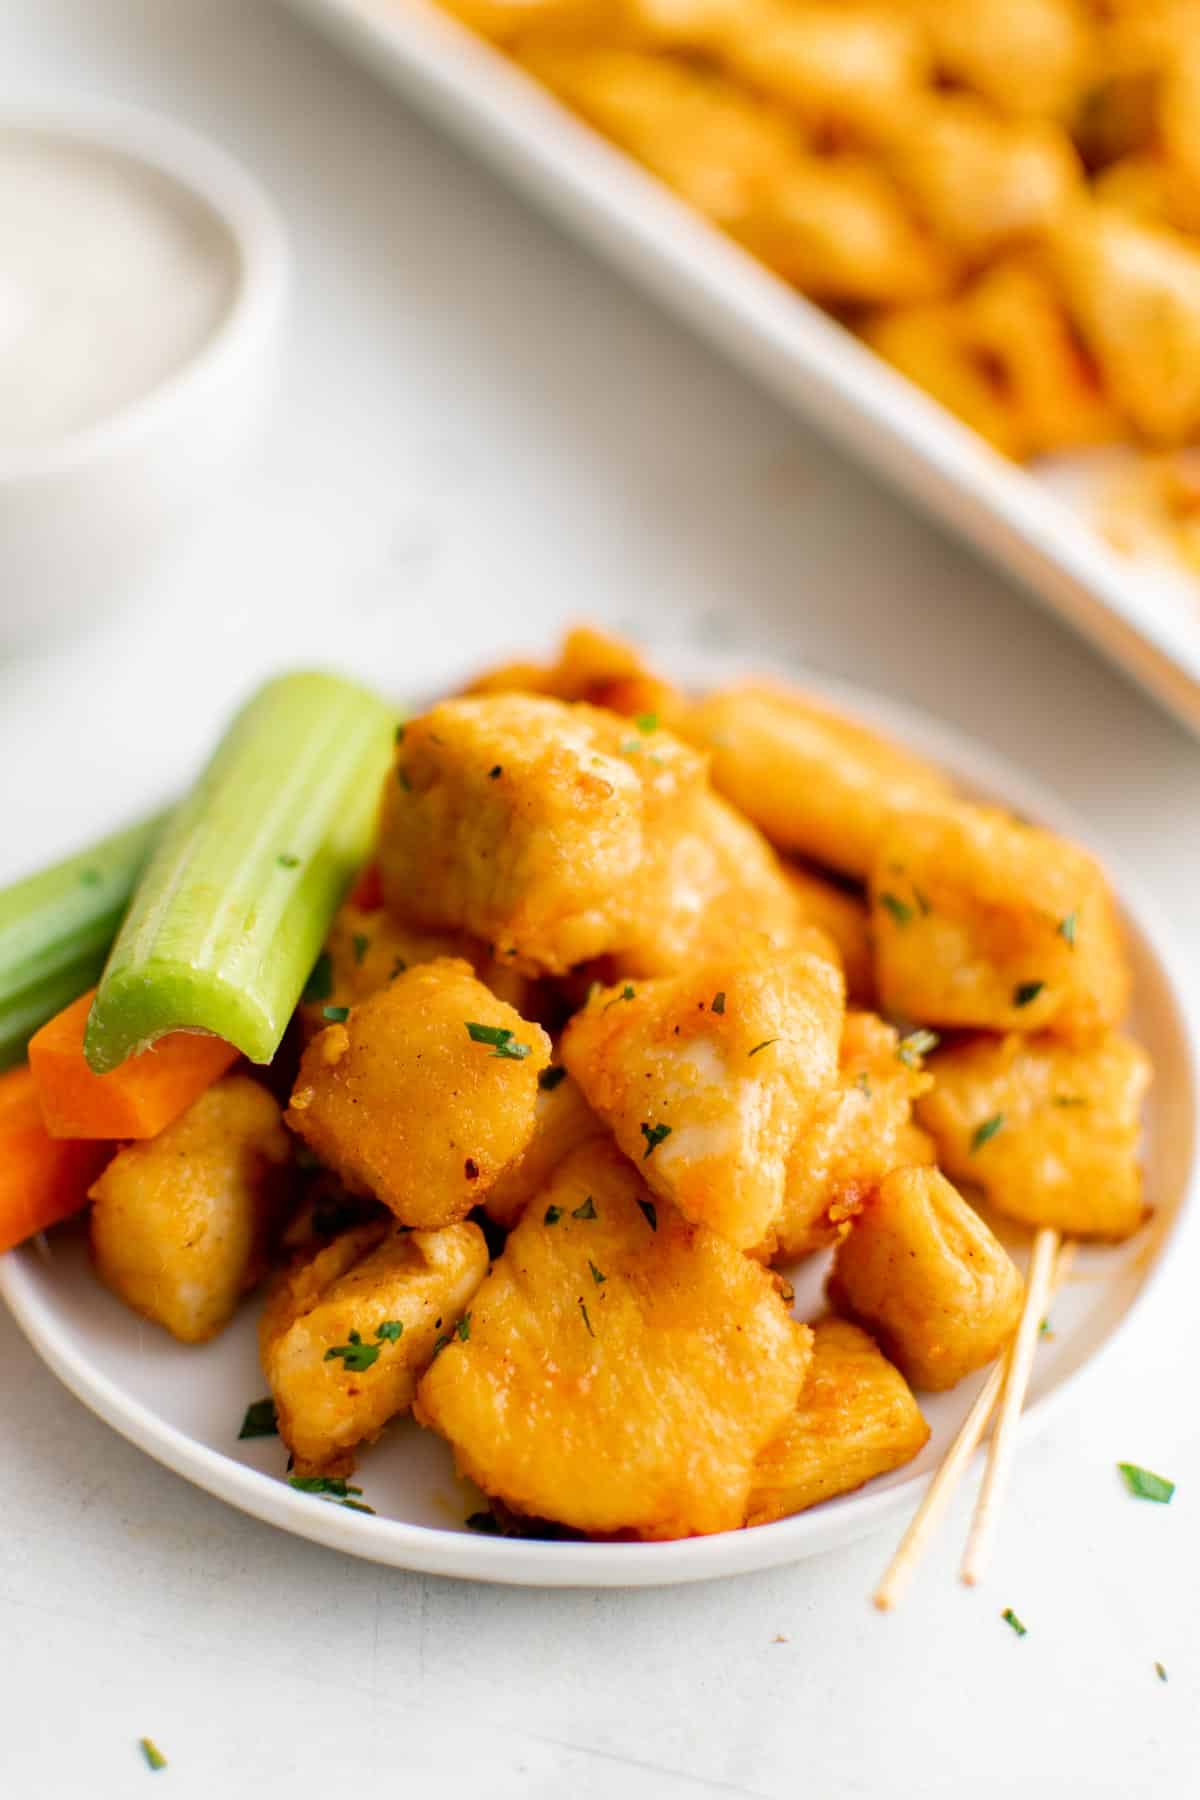 Buffalo chicken bites in a pile on a white plate, next to carrot and celery sticks.